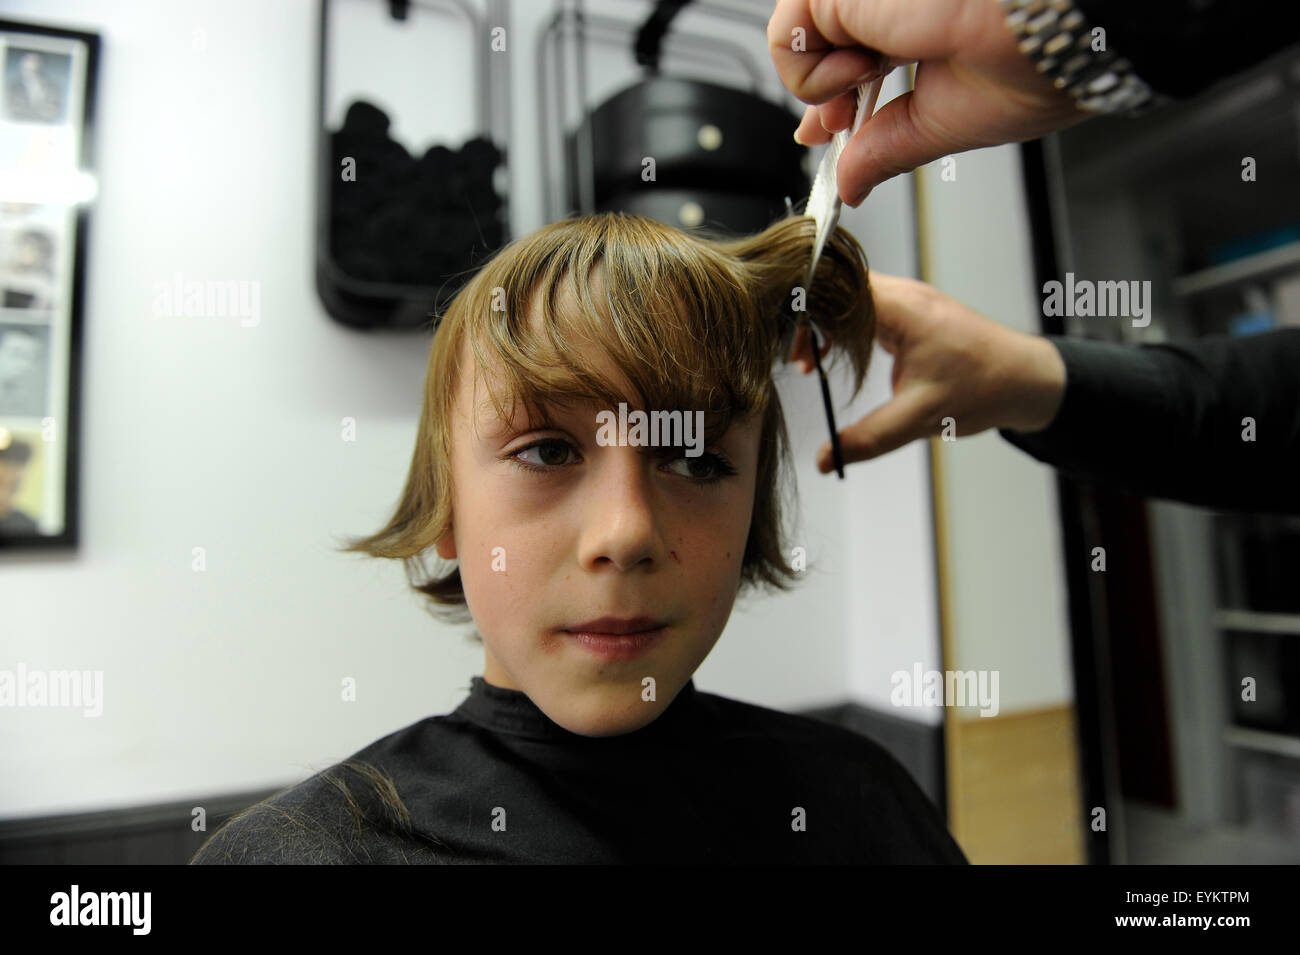 11 Year Old Caucasian Boy Having A Haircut In A Barbers Shop In